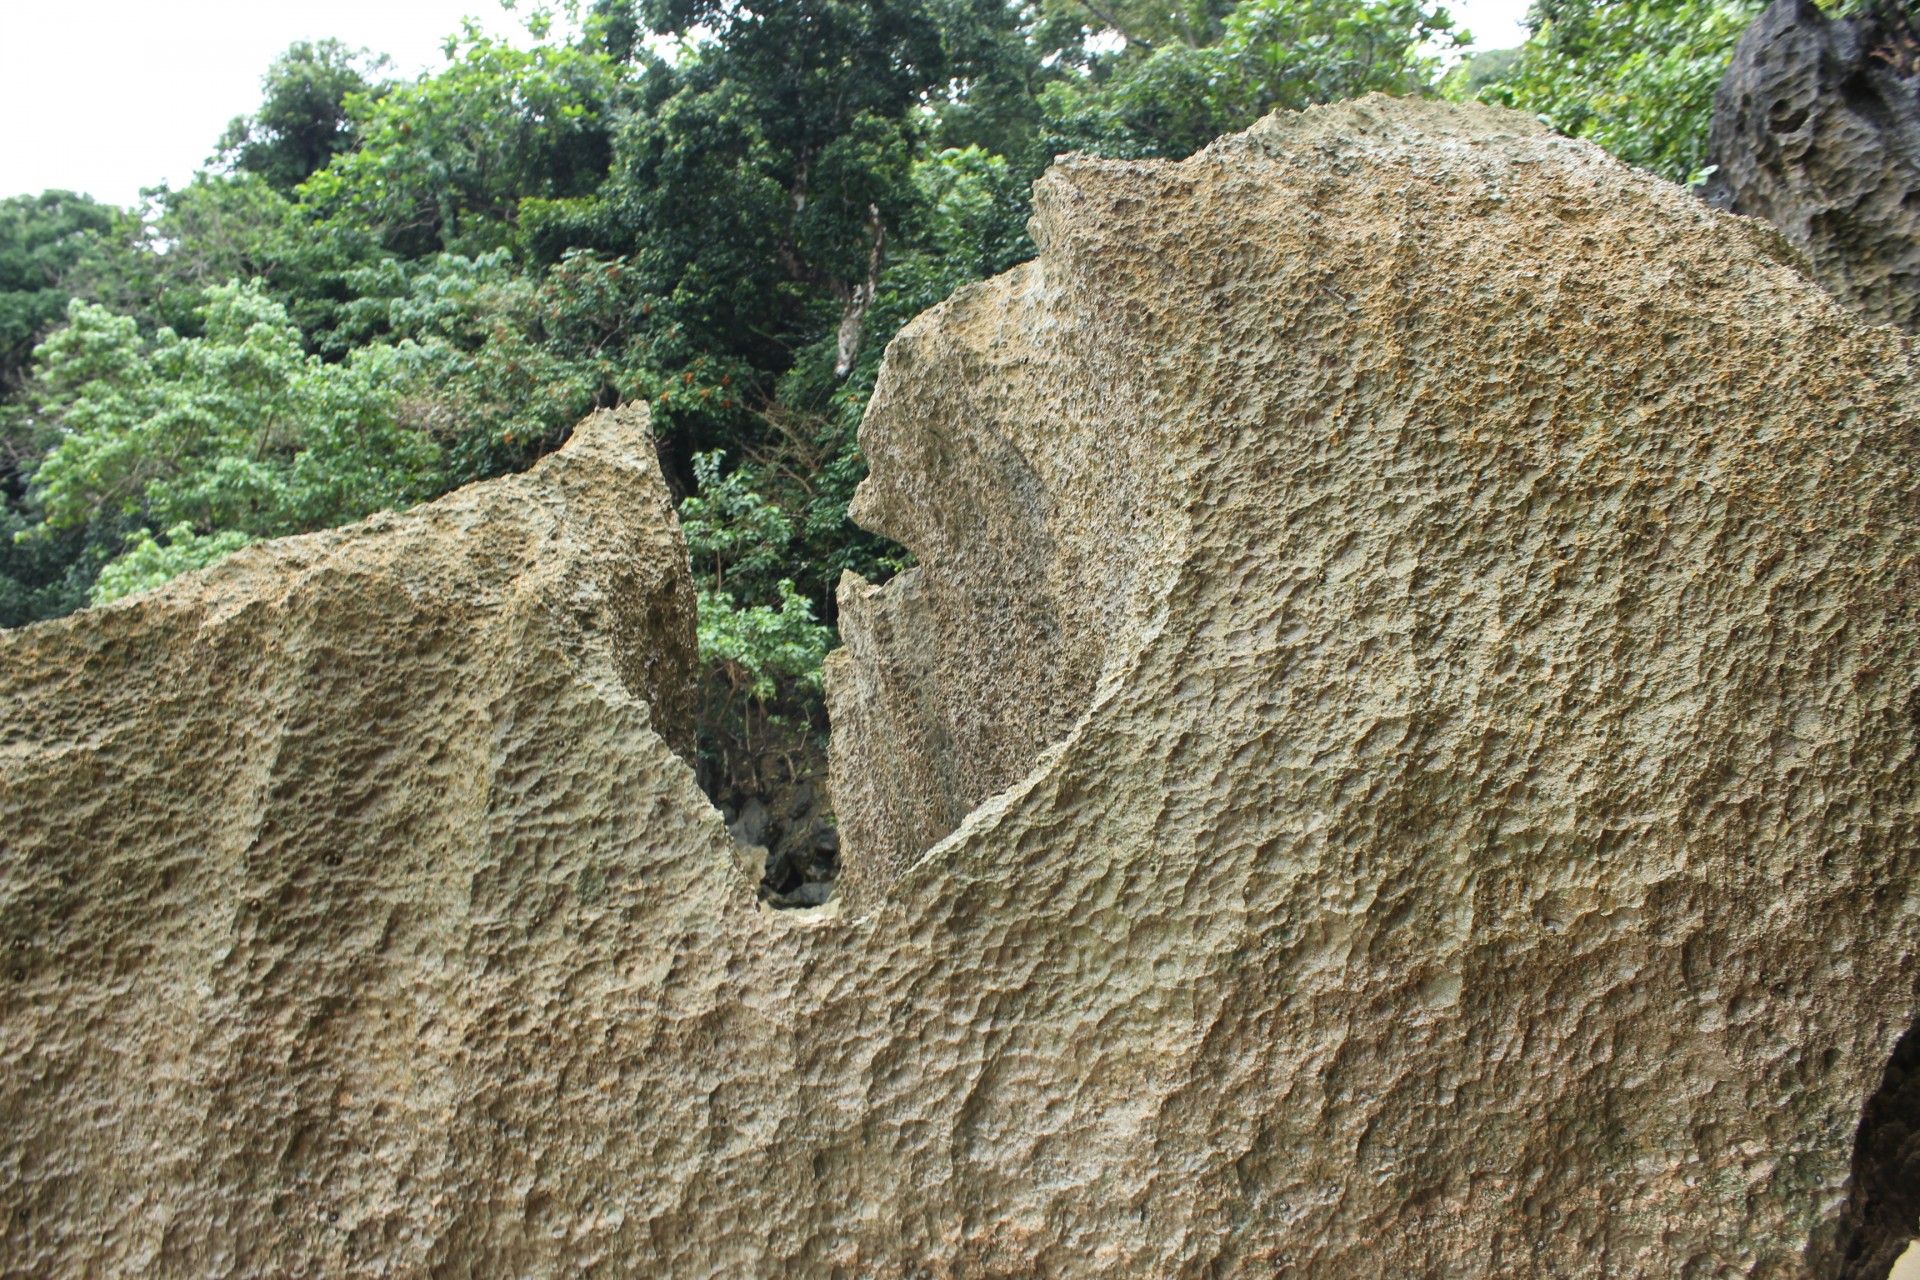 Rock Stone Formation